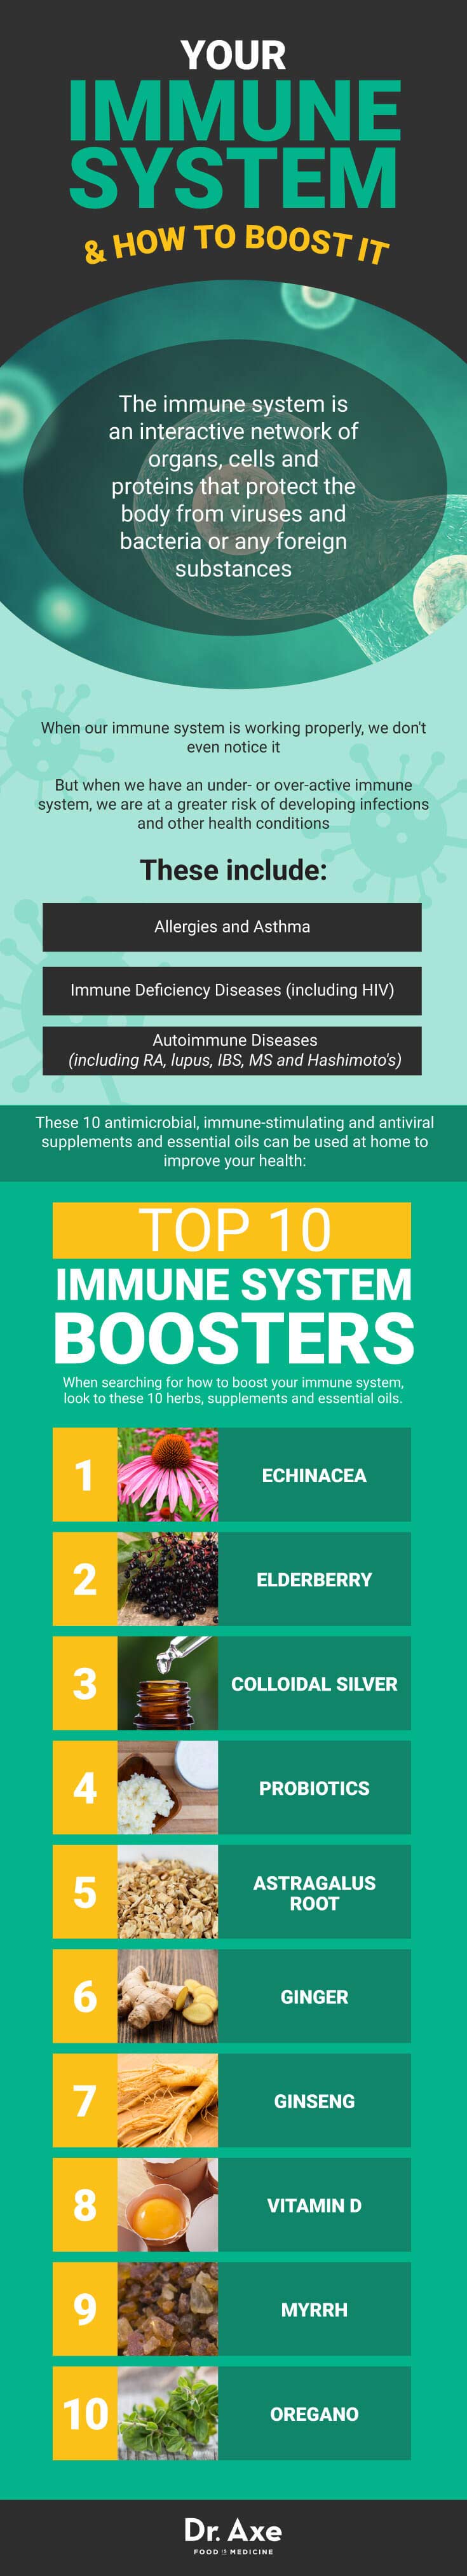 How to boost your immune system infographic